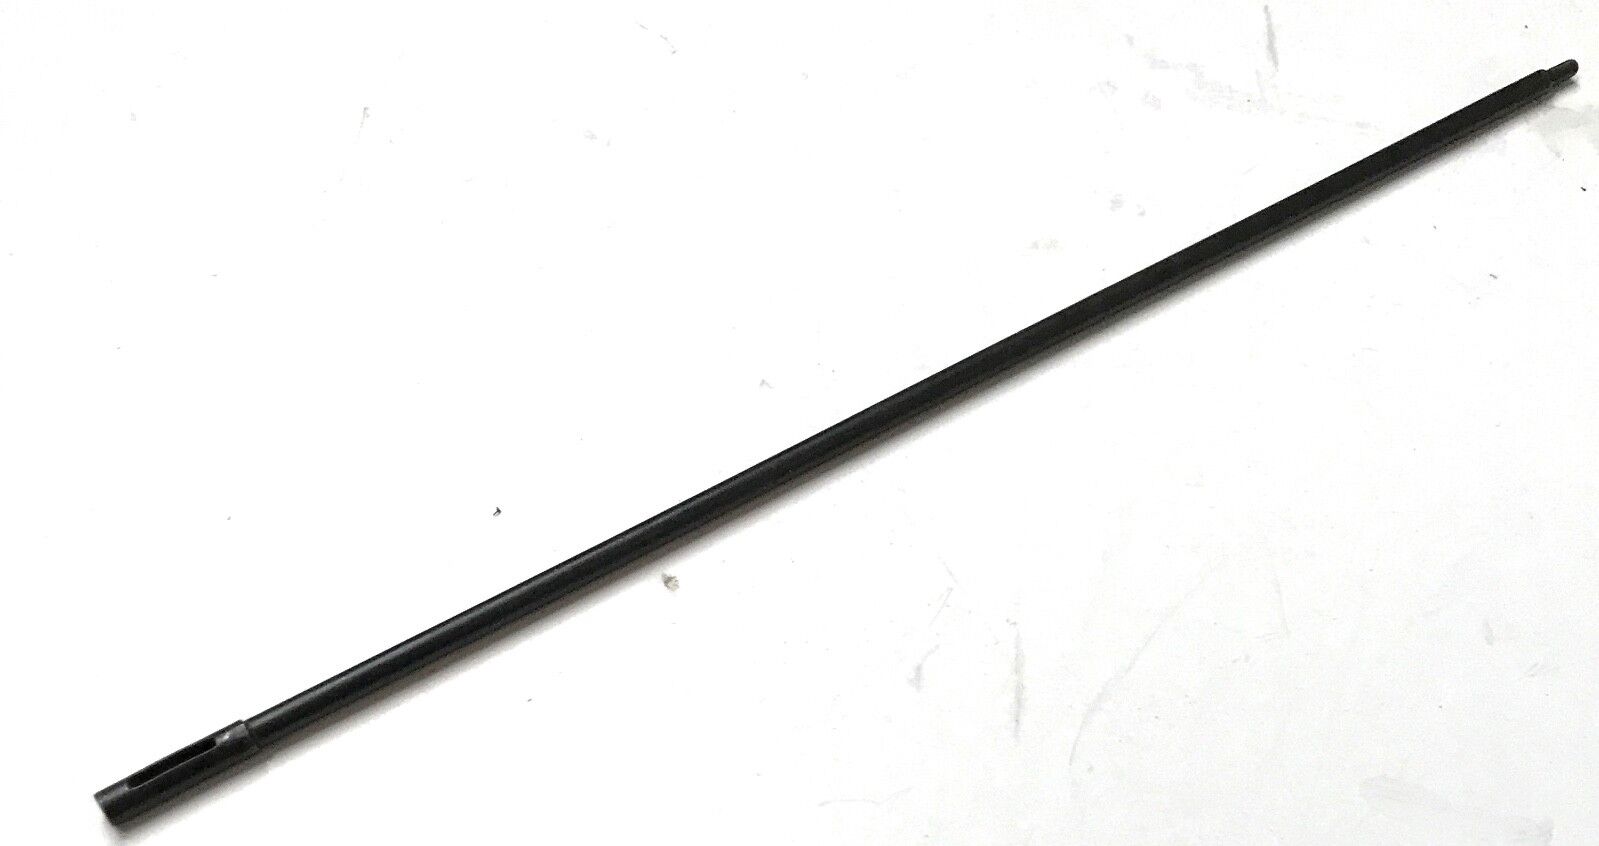 WWII GERMAN CZECH M-24 8MM RIFLE CLEANING ROD